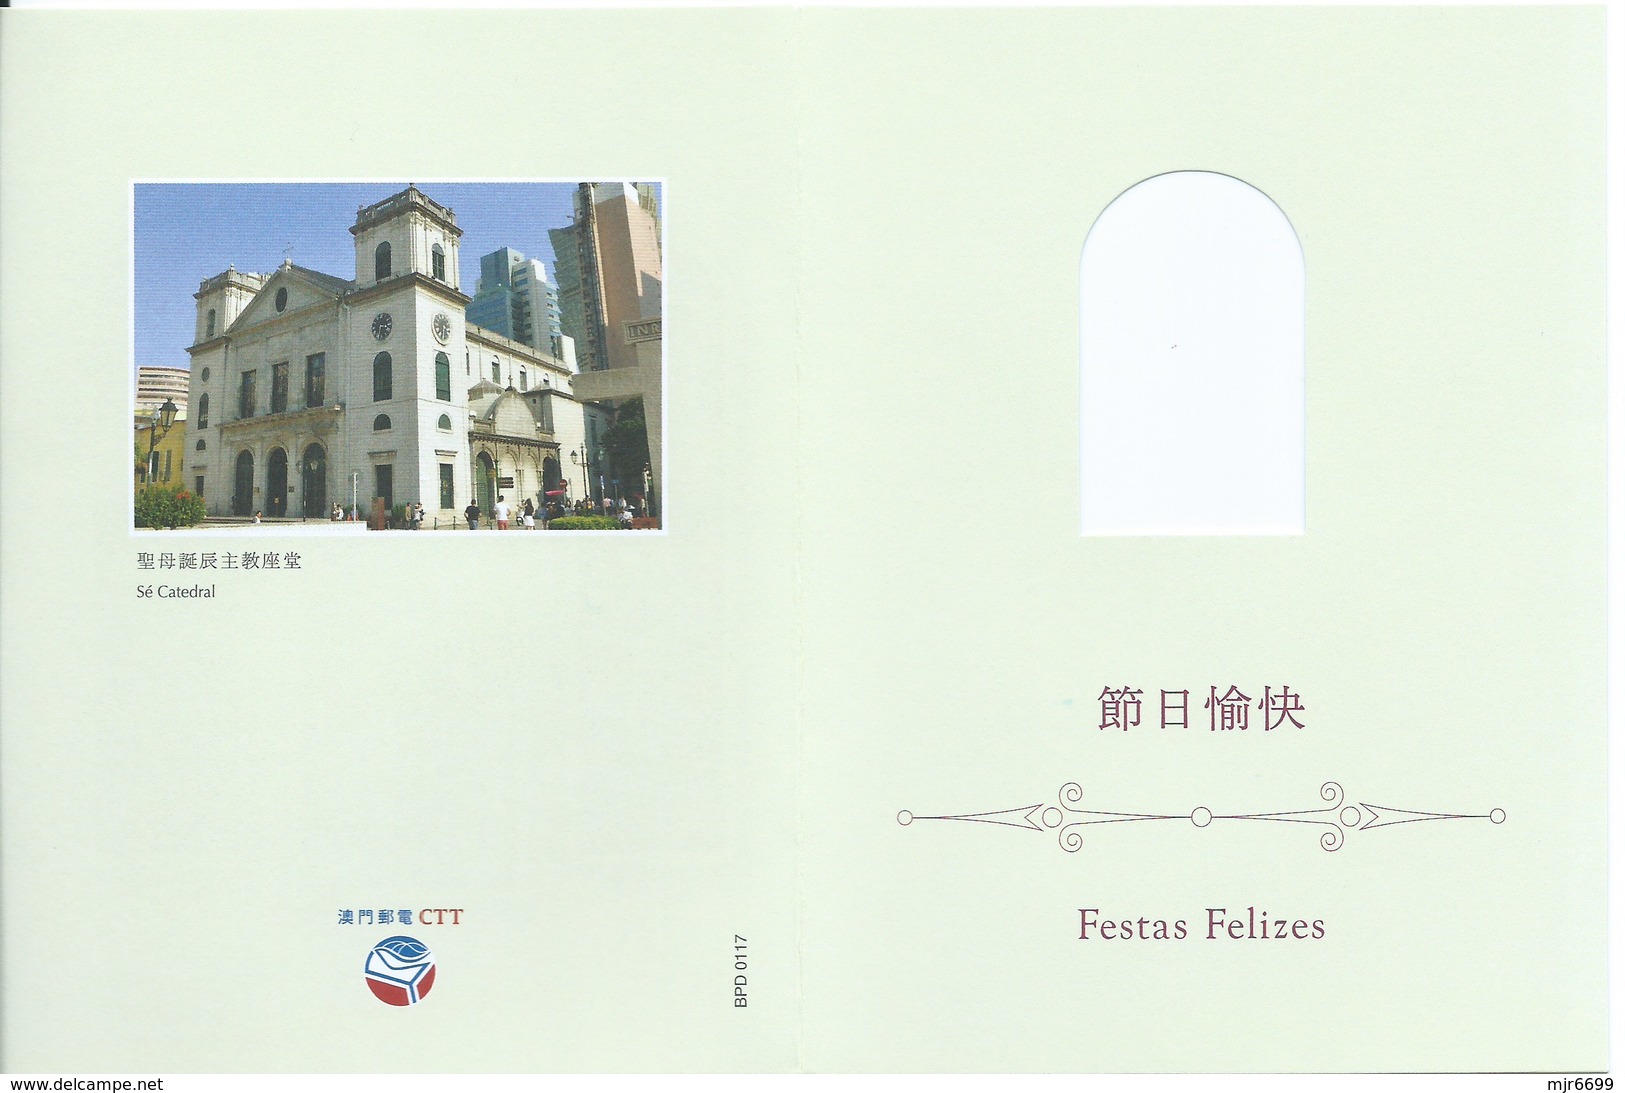 MACAU 2018 CHRISTMAS GREETING CARD & POSTAGE PAID COVER REGISTERD USAGE TO COLOANE, BEAUTIFUL COVER & CARD - Enteros Postales